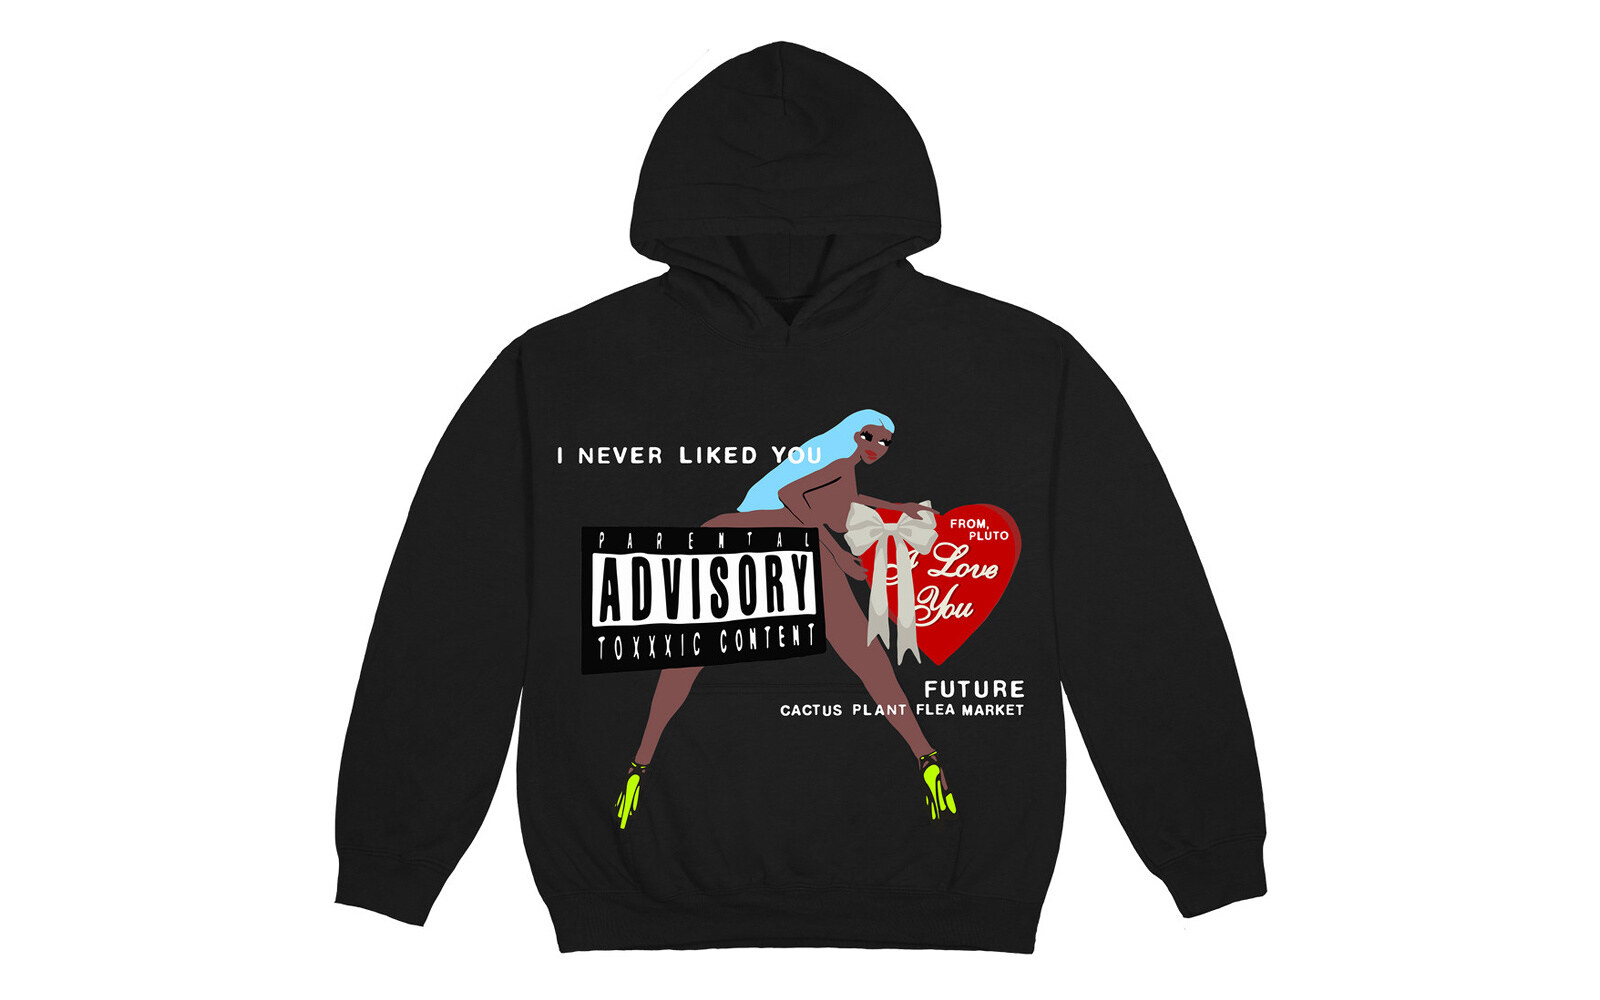 Future i never liked you merch CPFM